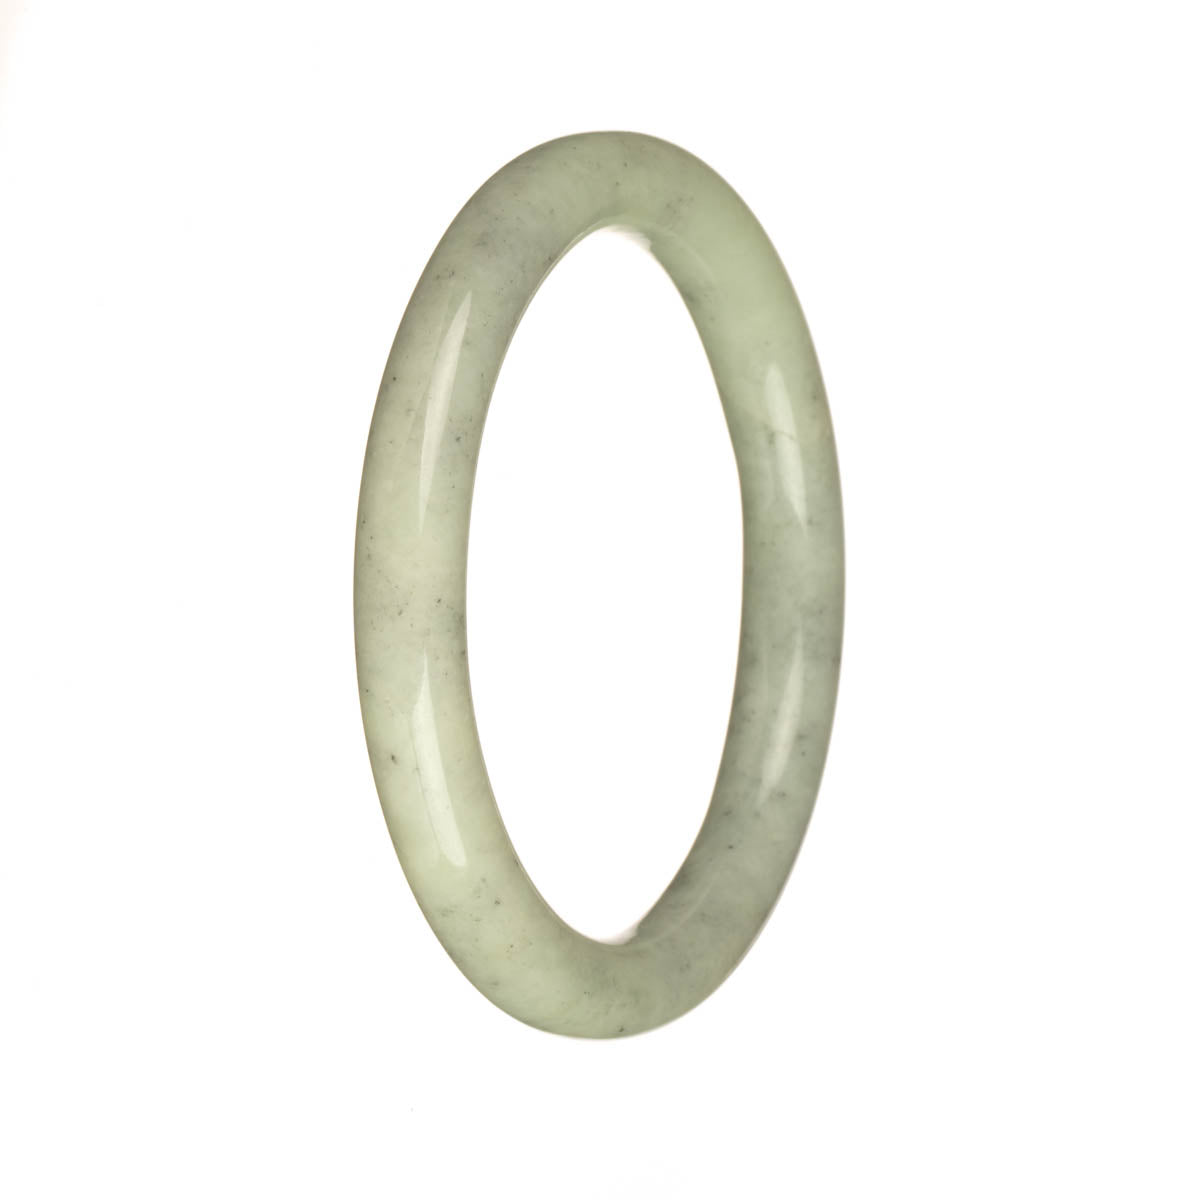 A small round grey jade bangle with a certified Grade A quality, perfect for accessorizing any outfit.